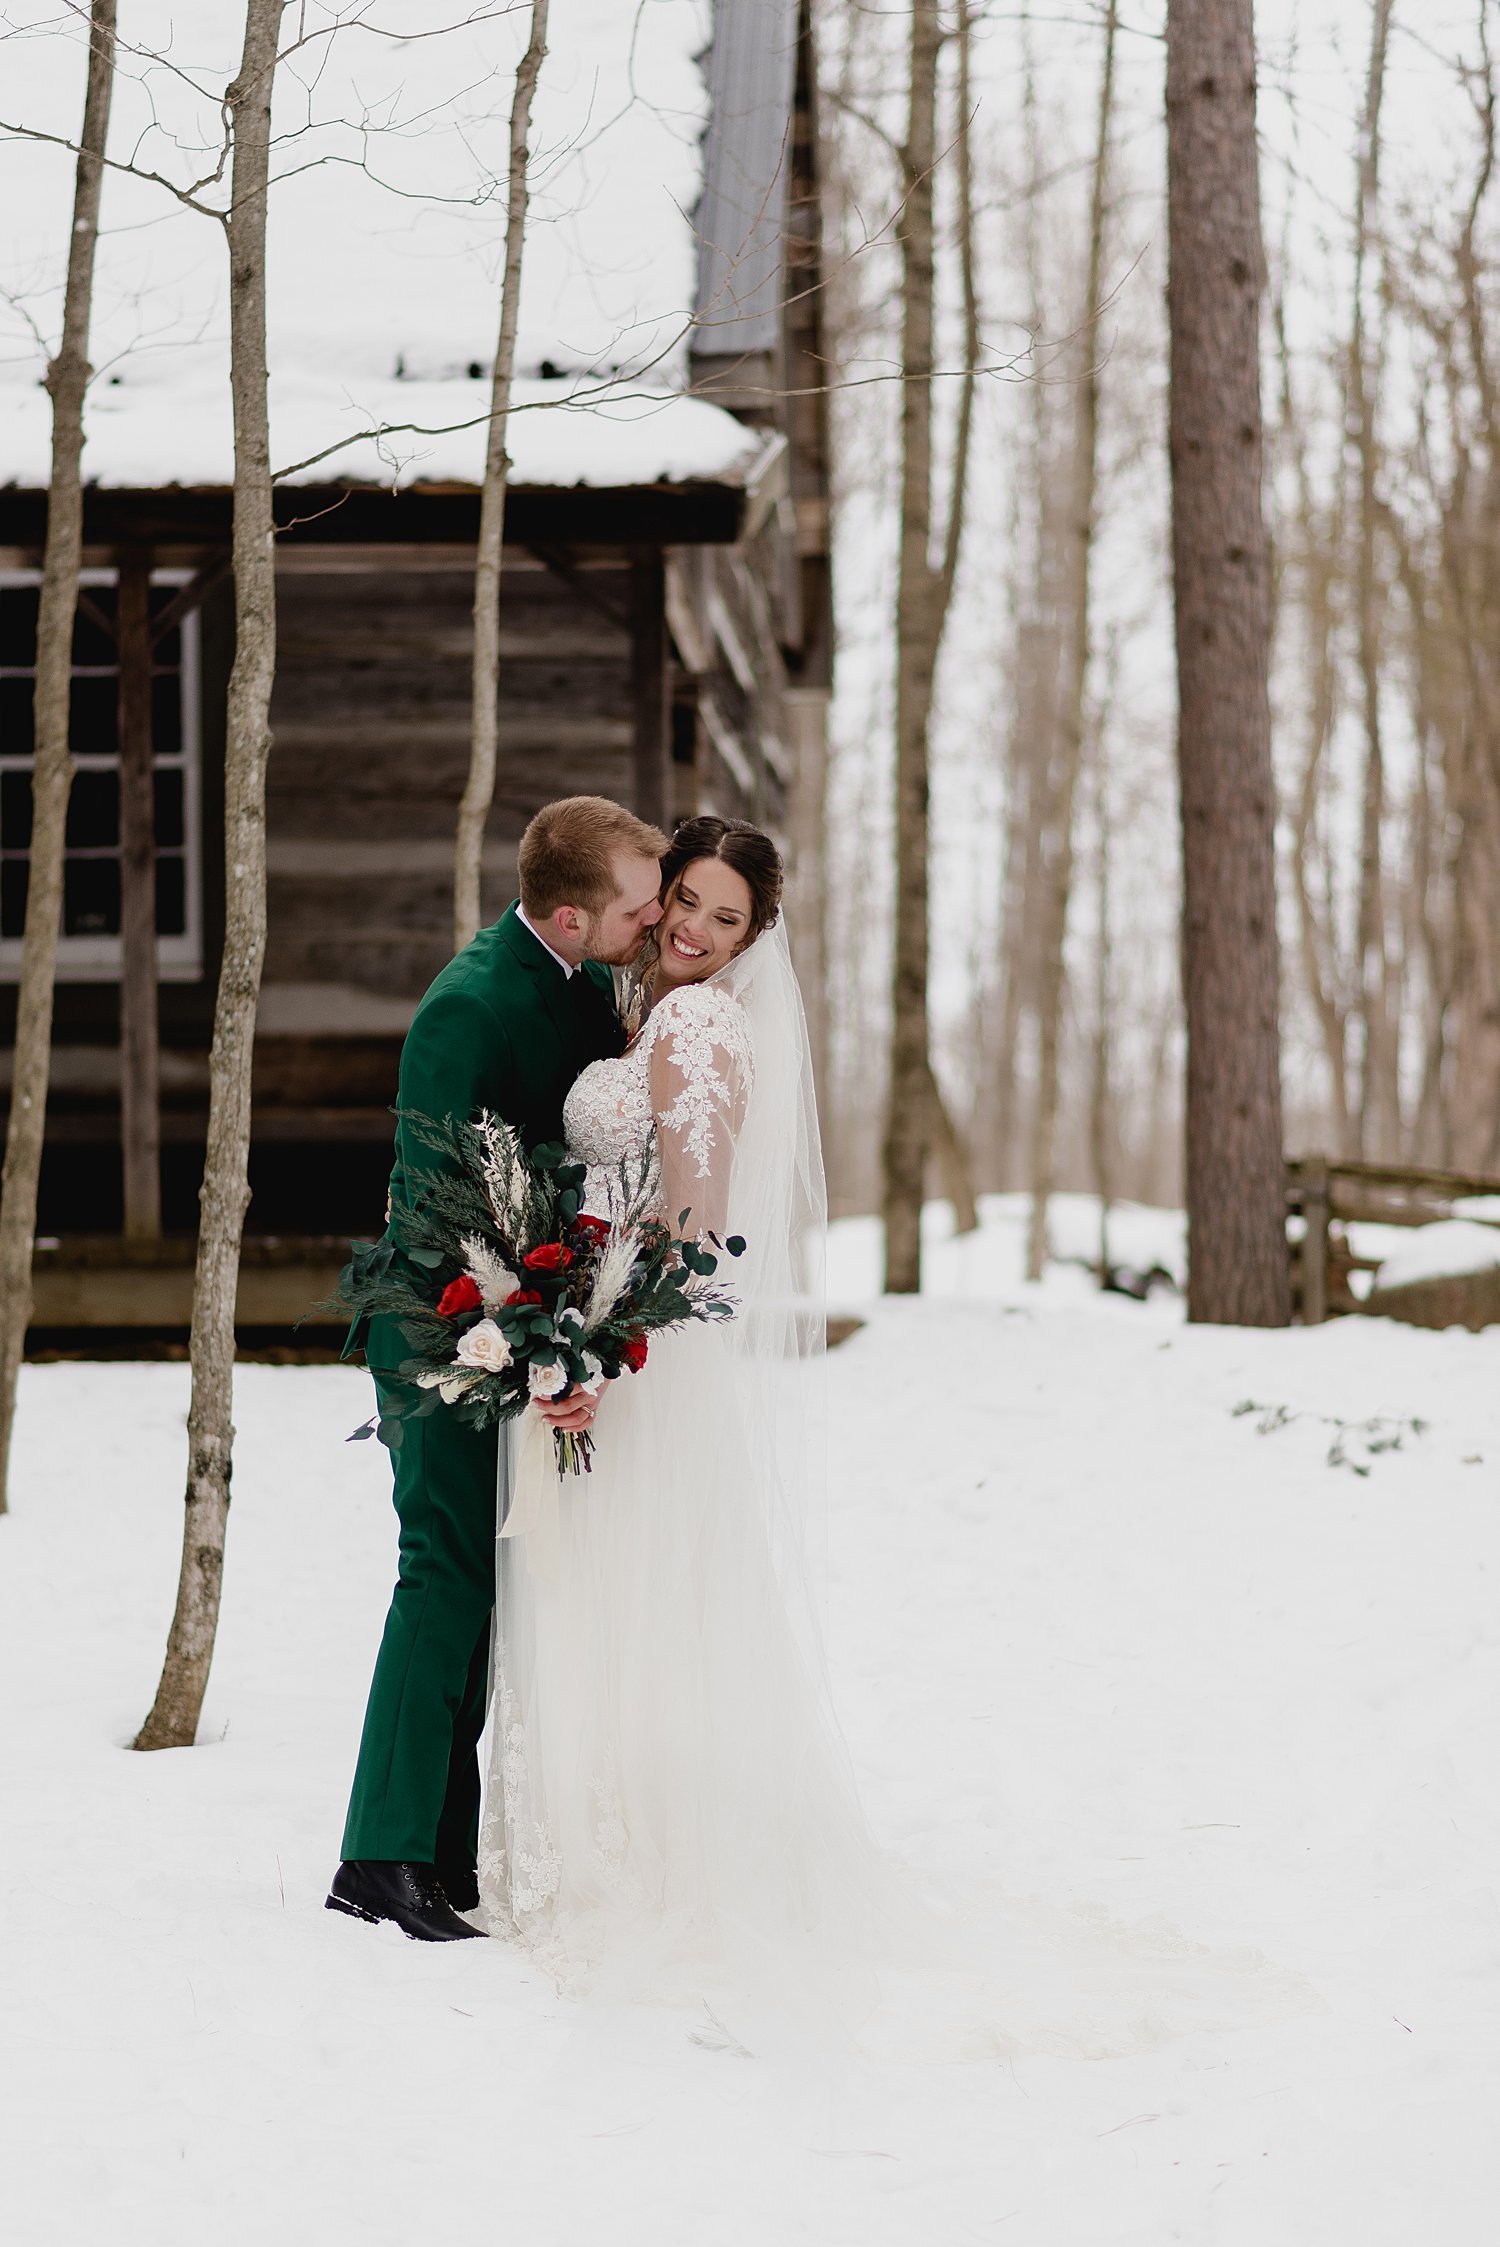 Intimate Winter Elopement at O'Hara Mill Homestead in Madoc, Ontario | Prince Edward County Wedding Photographer | Holly McMurter Photographs_0043.jpg